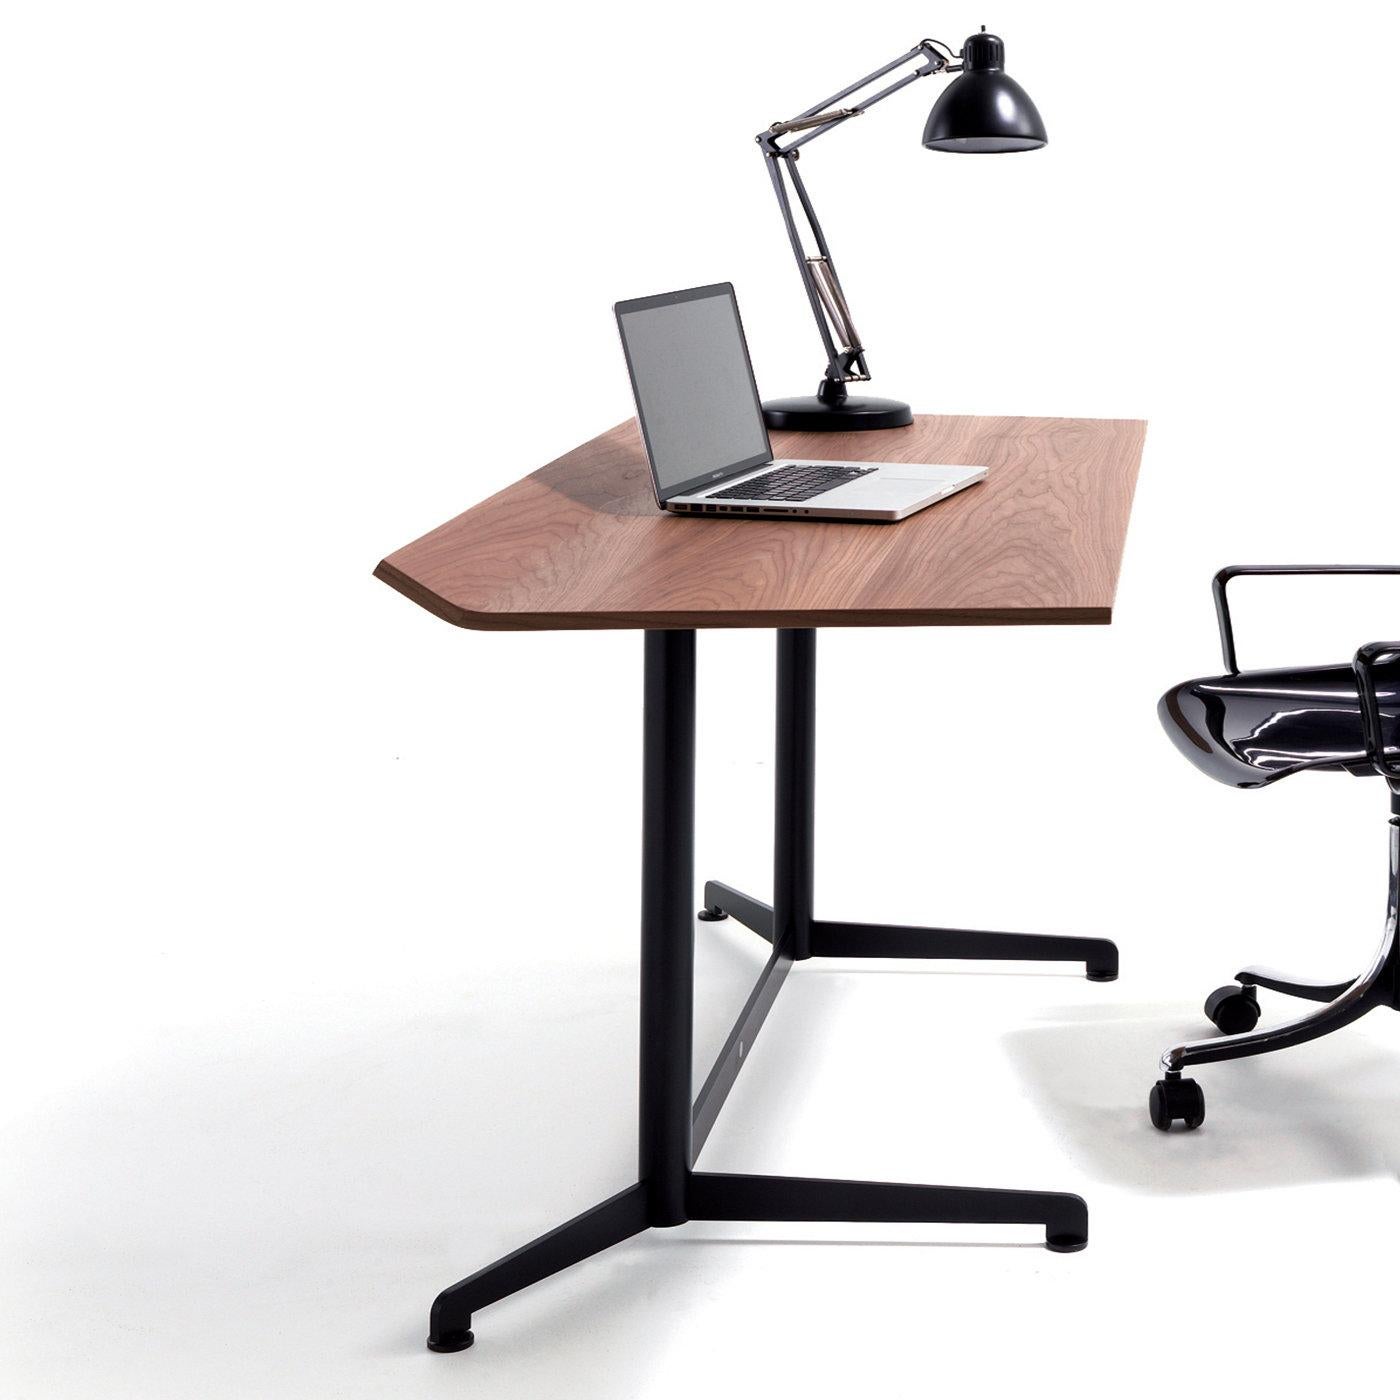 The minimalist and elegant design of this desk makes it the perfect addition to any modern context requiring an efficiently-equipped working station. A streamlined structure in black-painted steel sustains the sturdy top in Canaletto walnut, which